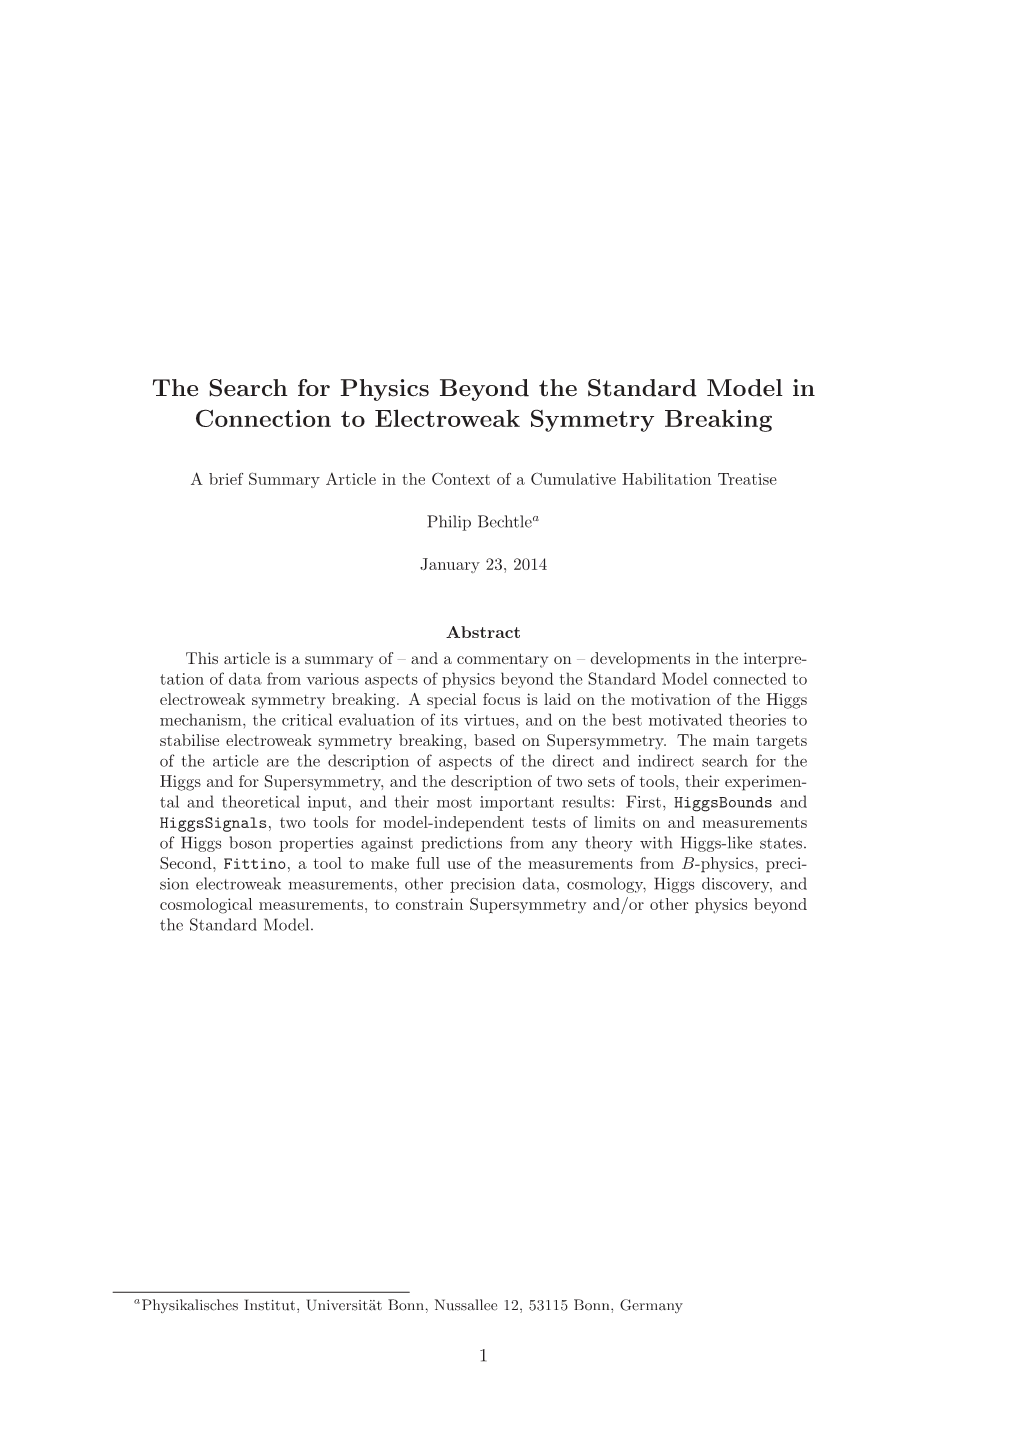 The Search for Physics Beyond the Standard Model in Connection to Electroweak Symmetry Breaking